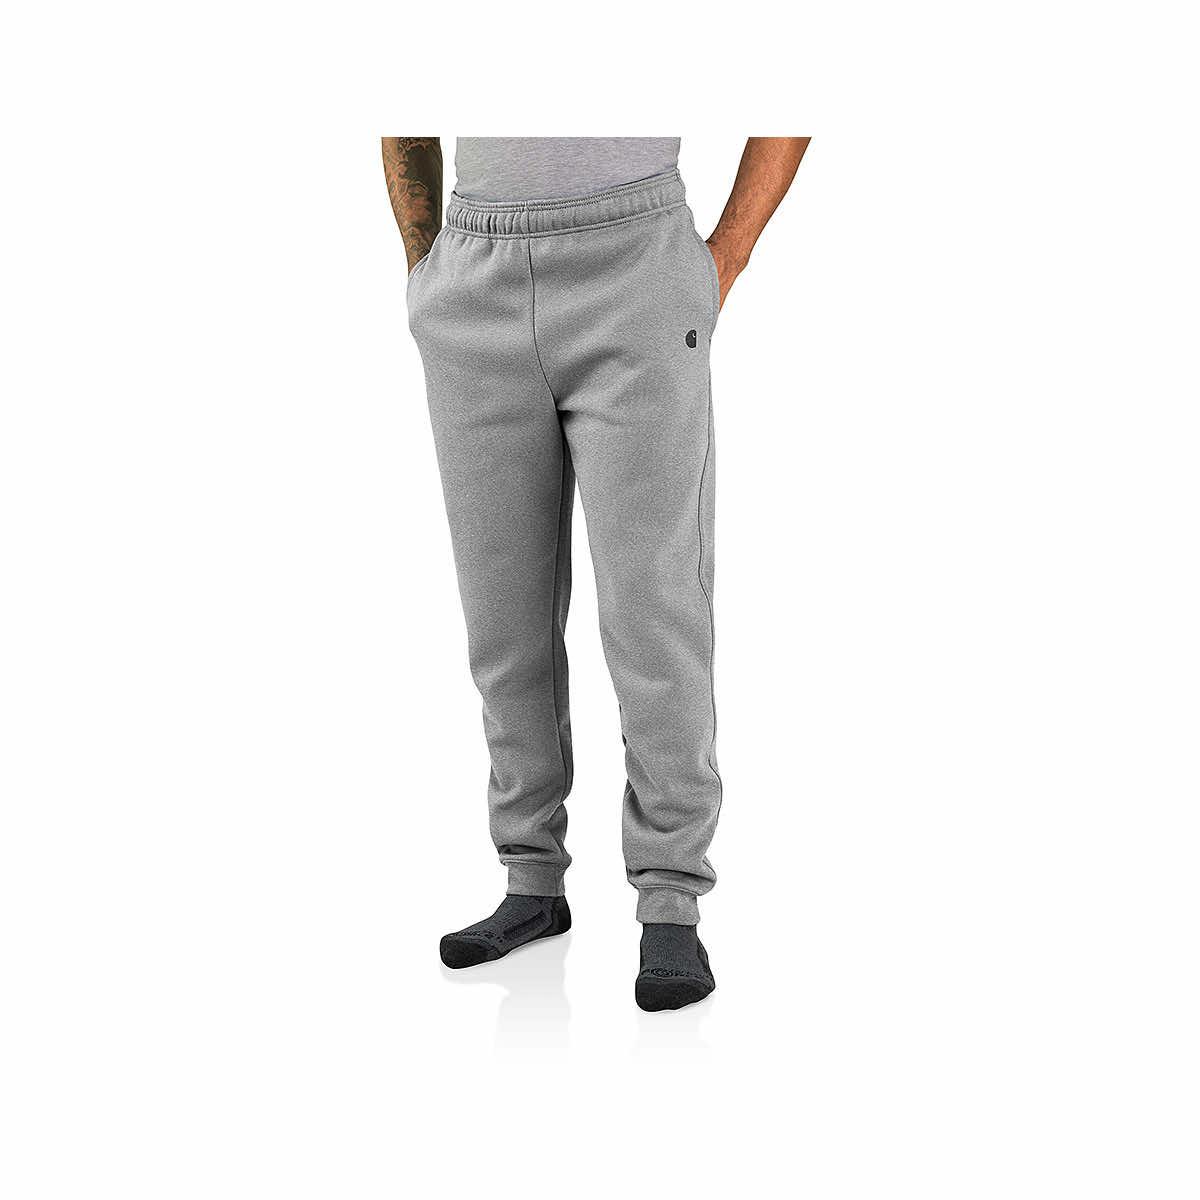  Men's Relaxed Fit Midweight Tapered Sweatpants